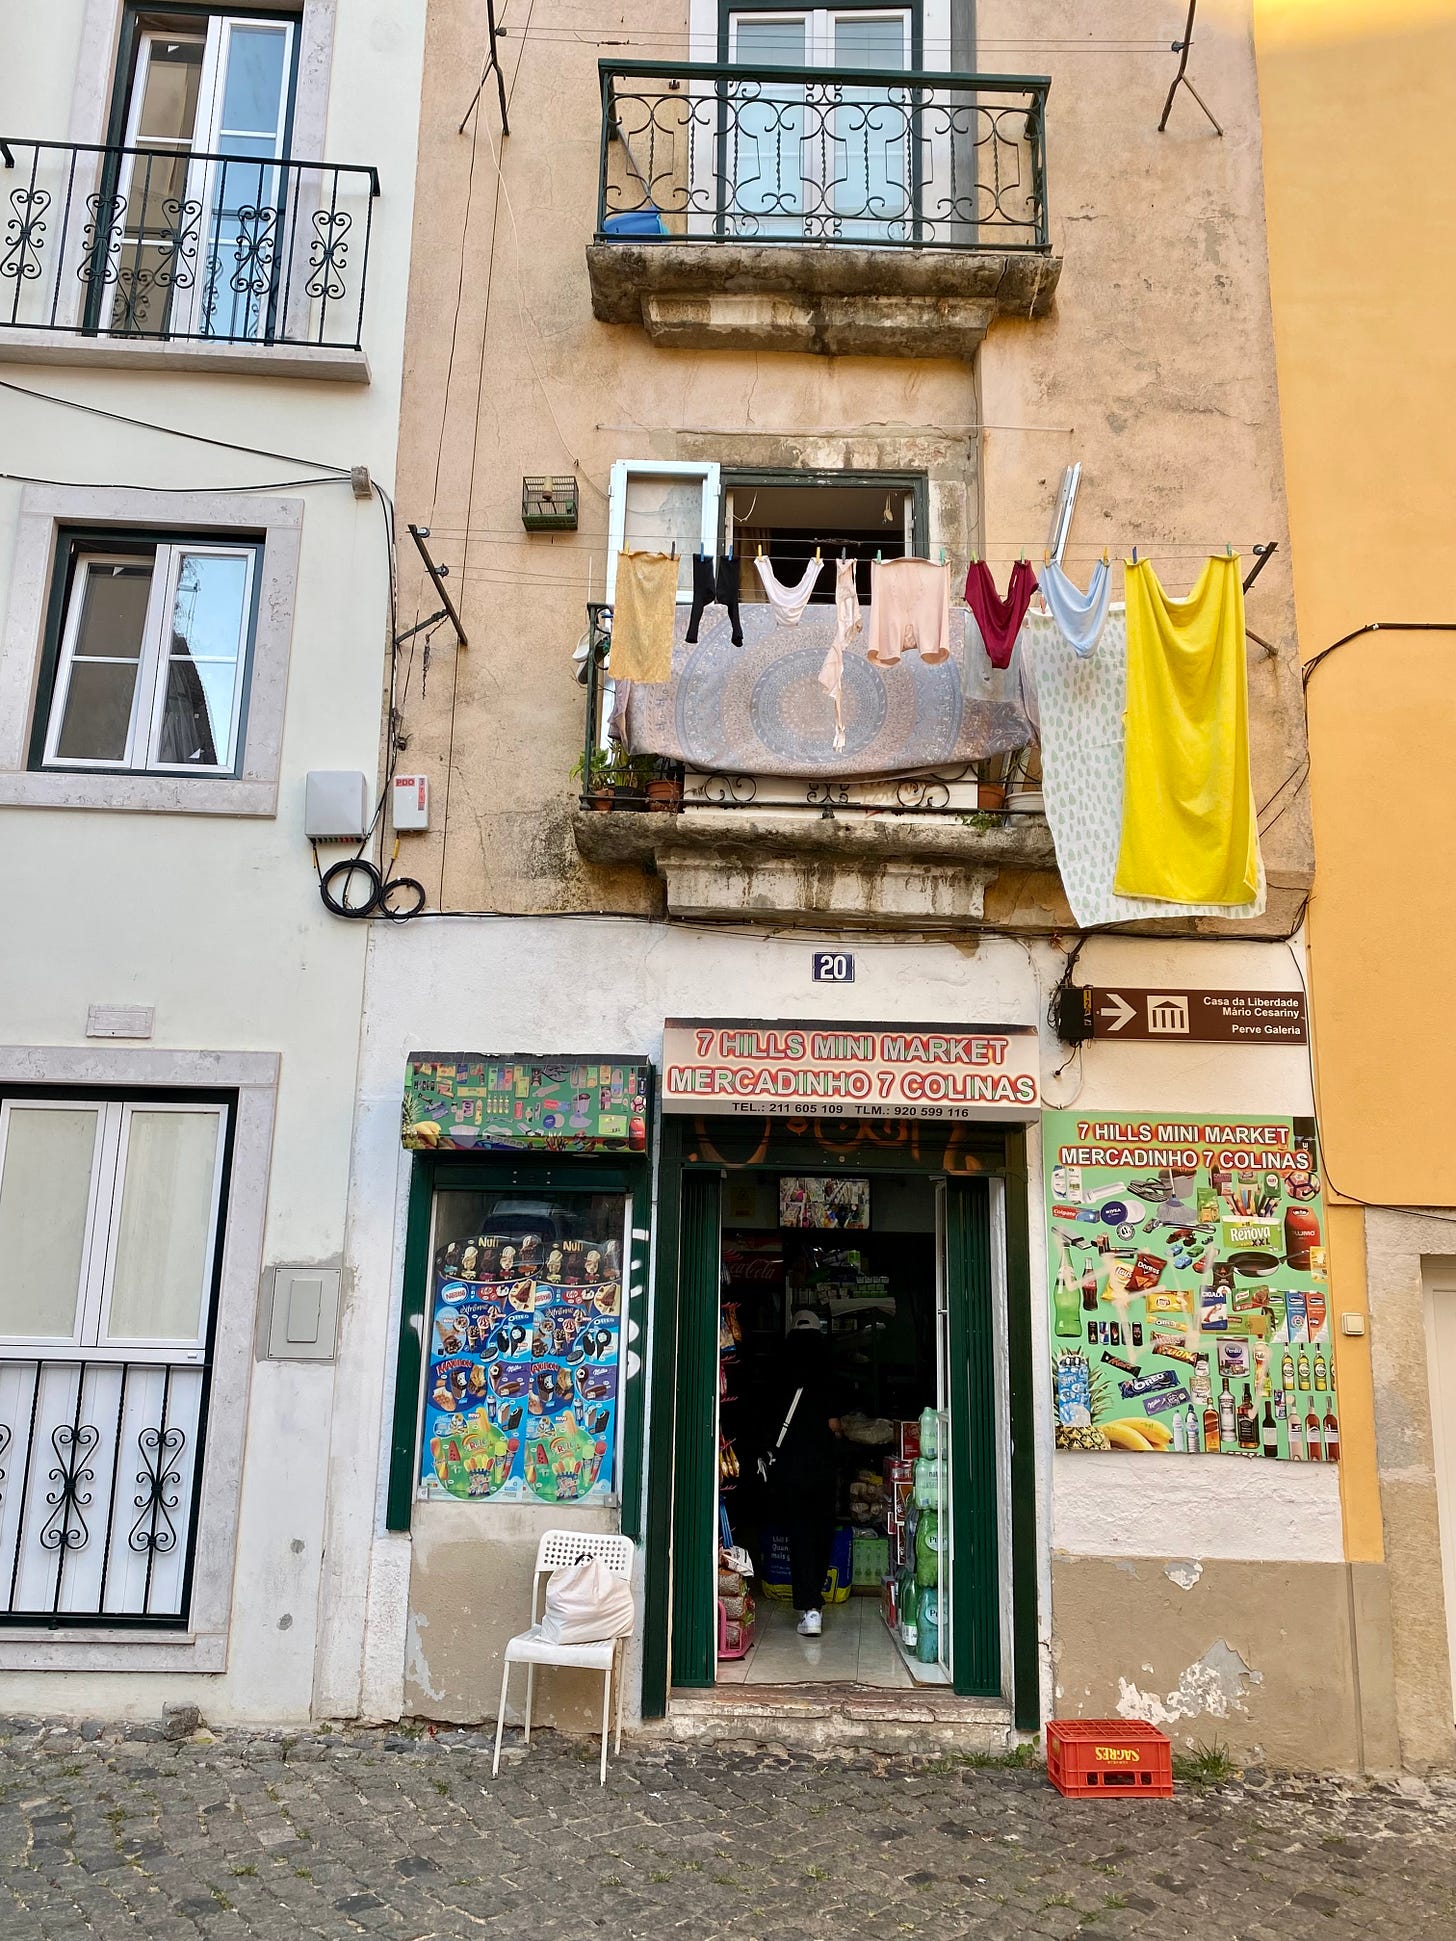 A building in Lisbon with washing hanging from the first floor balcony and a shop door below